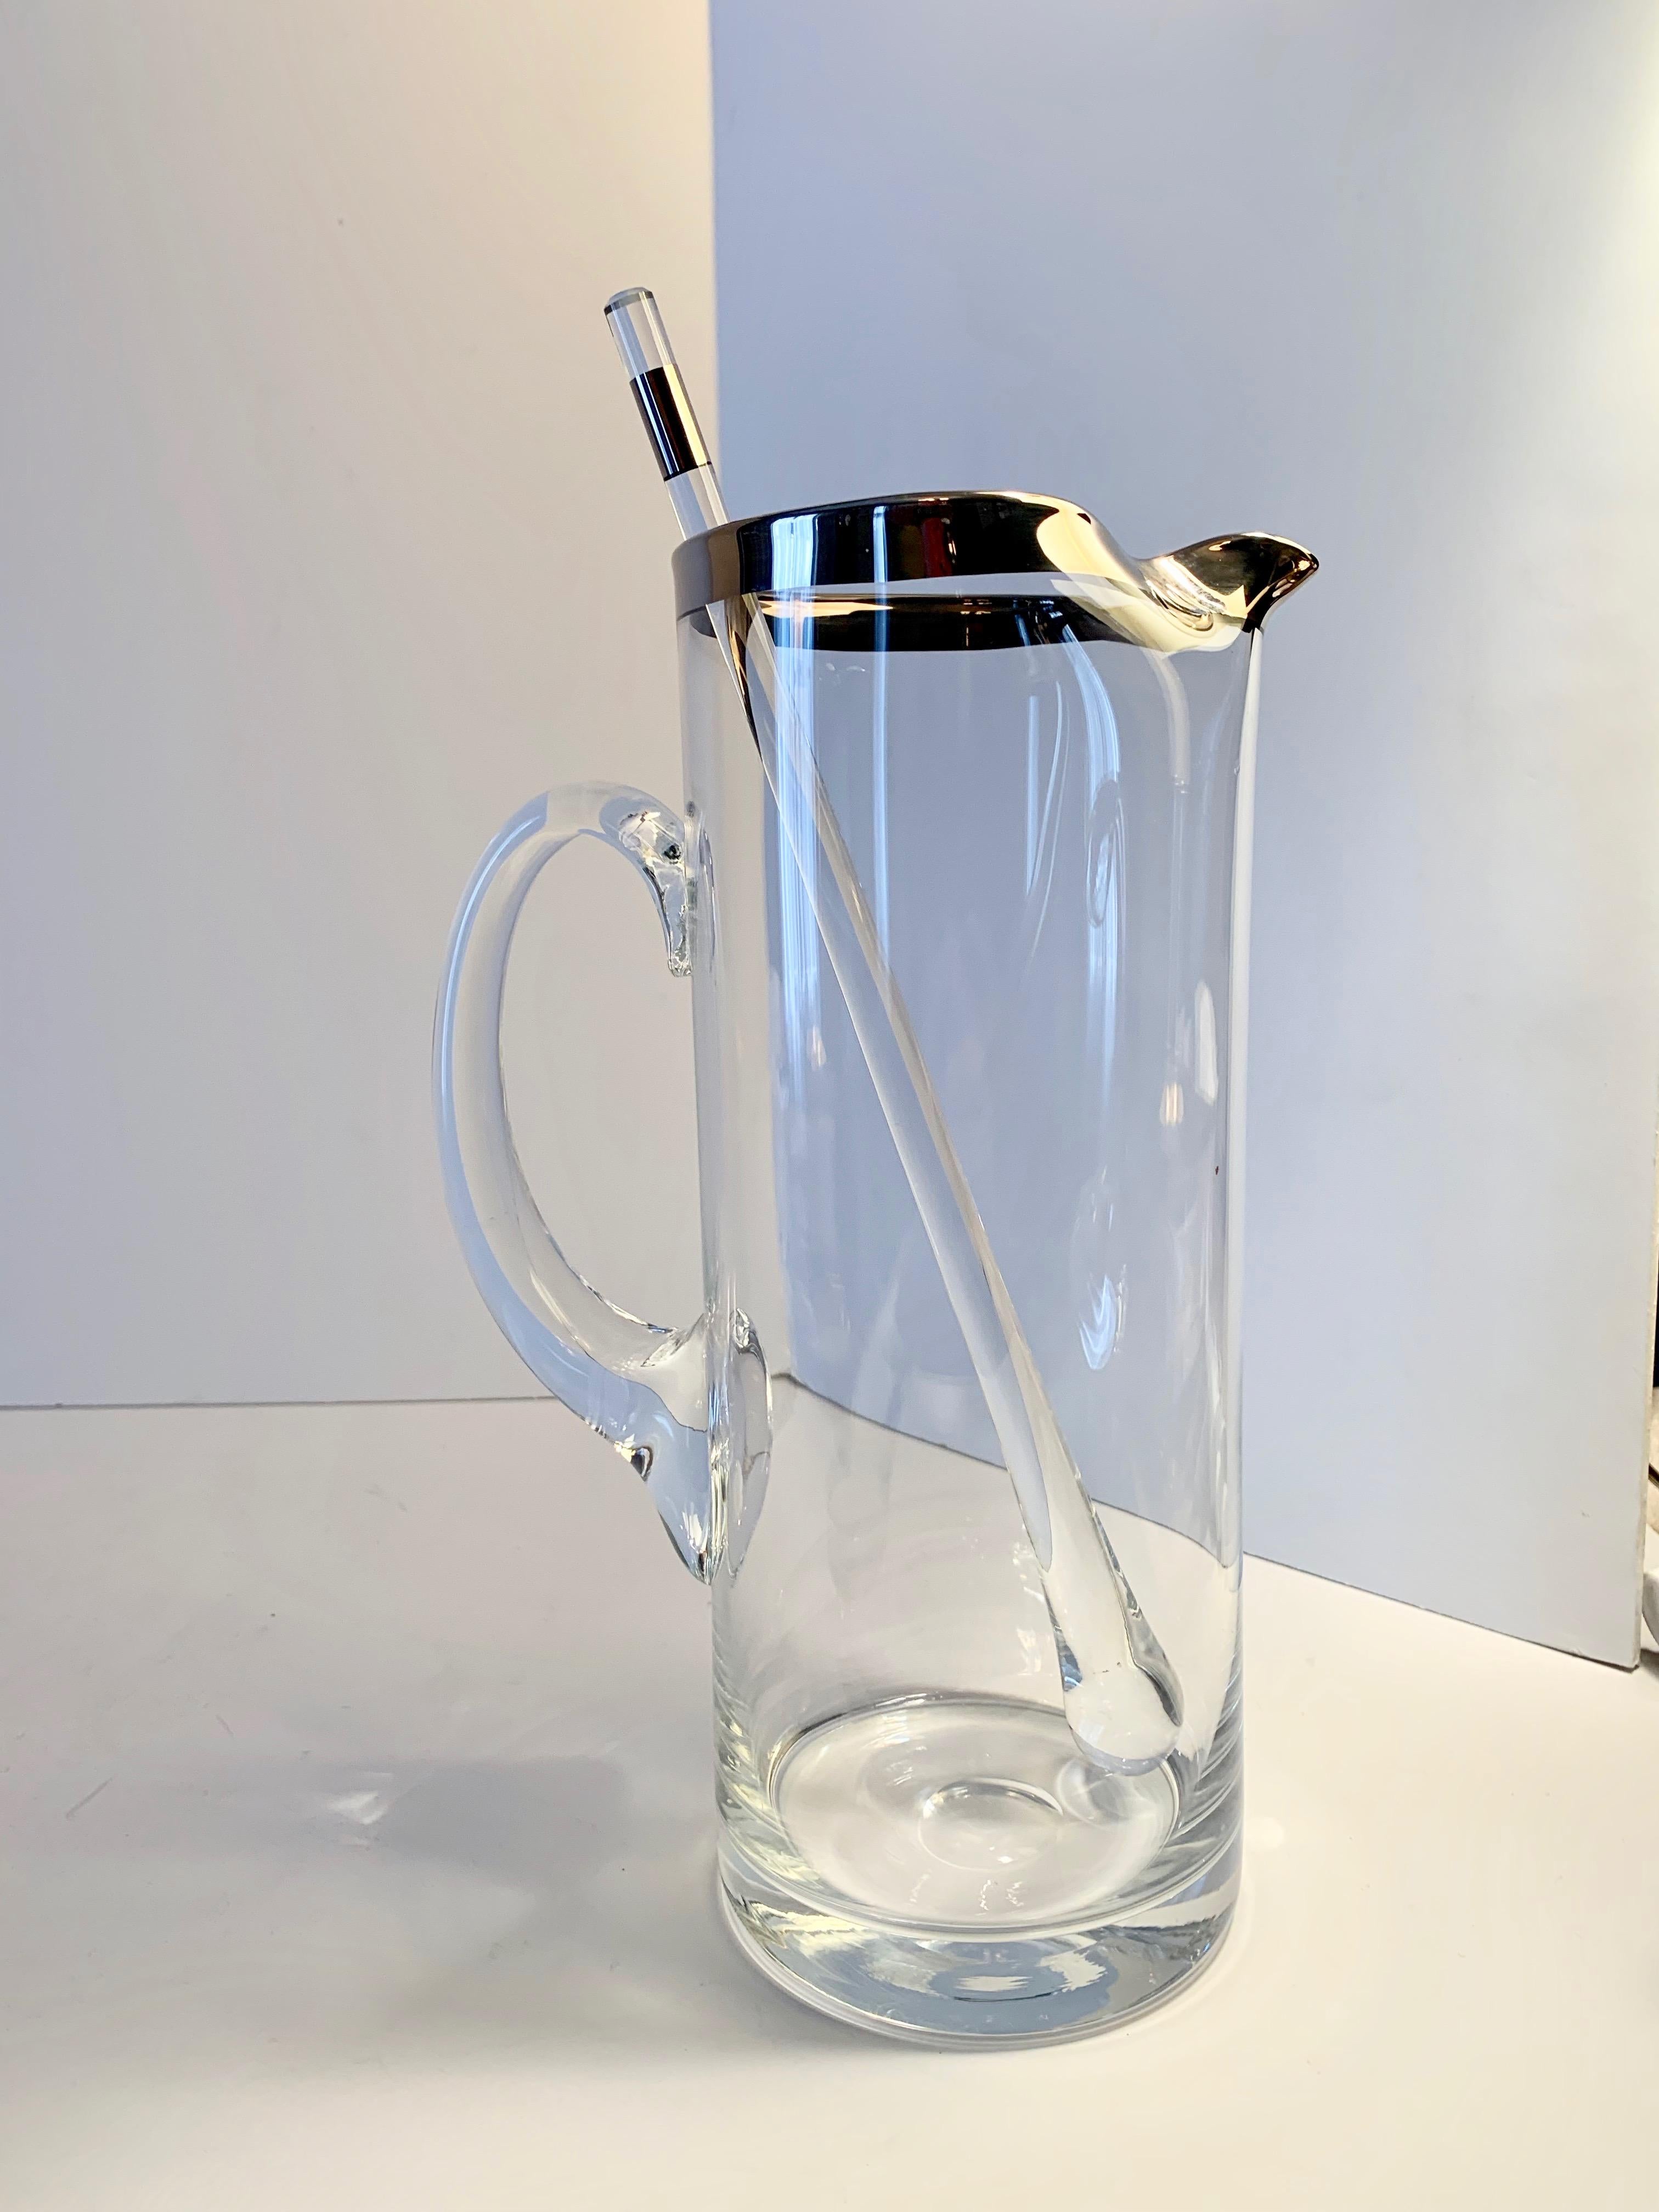 Dorothy Thorpe cocktail pitcher with stirrer - The silver rimmed pitcher and matching silver rimmed stirrer are the perfect companion for the sophisticated bar!

The stirrer is 11.5